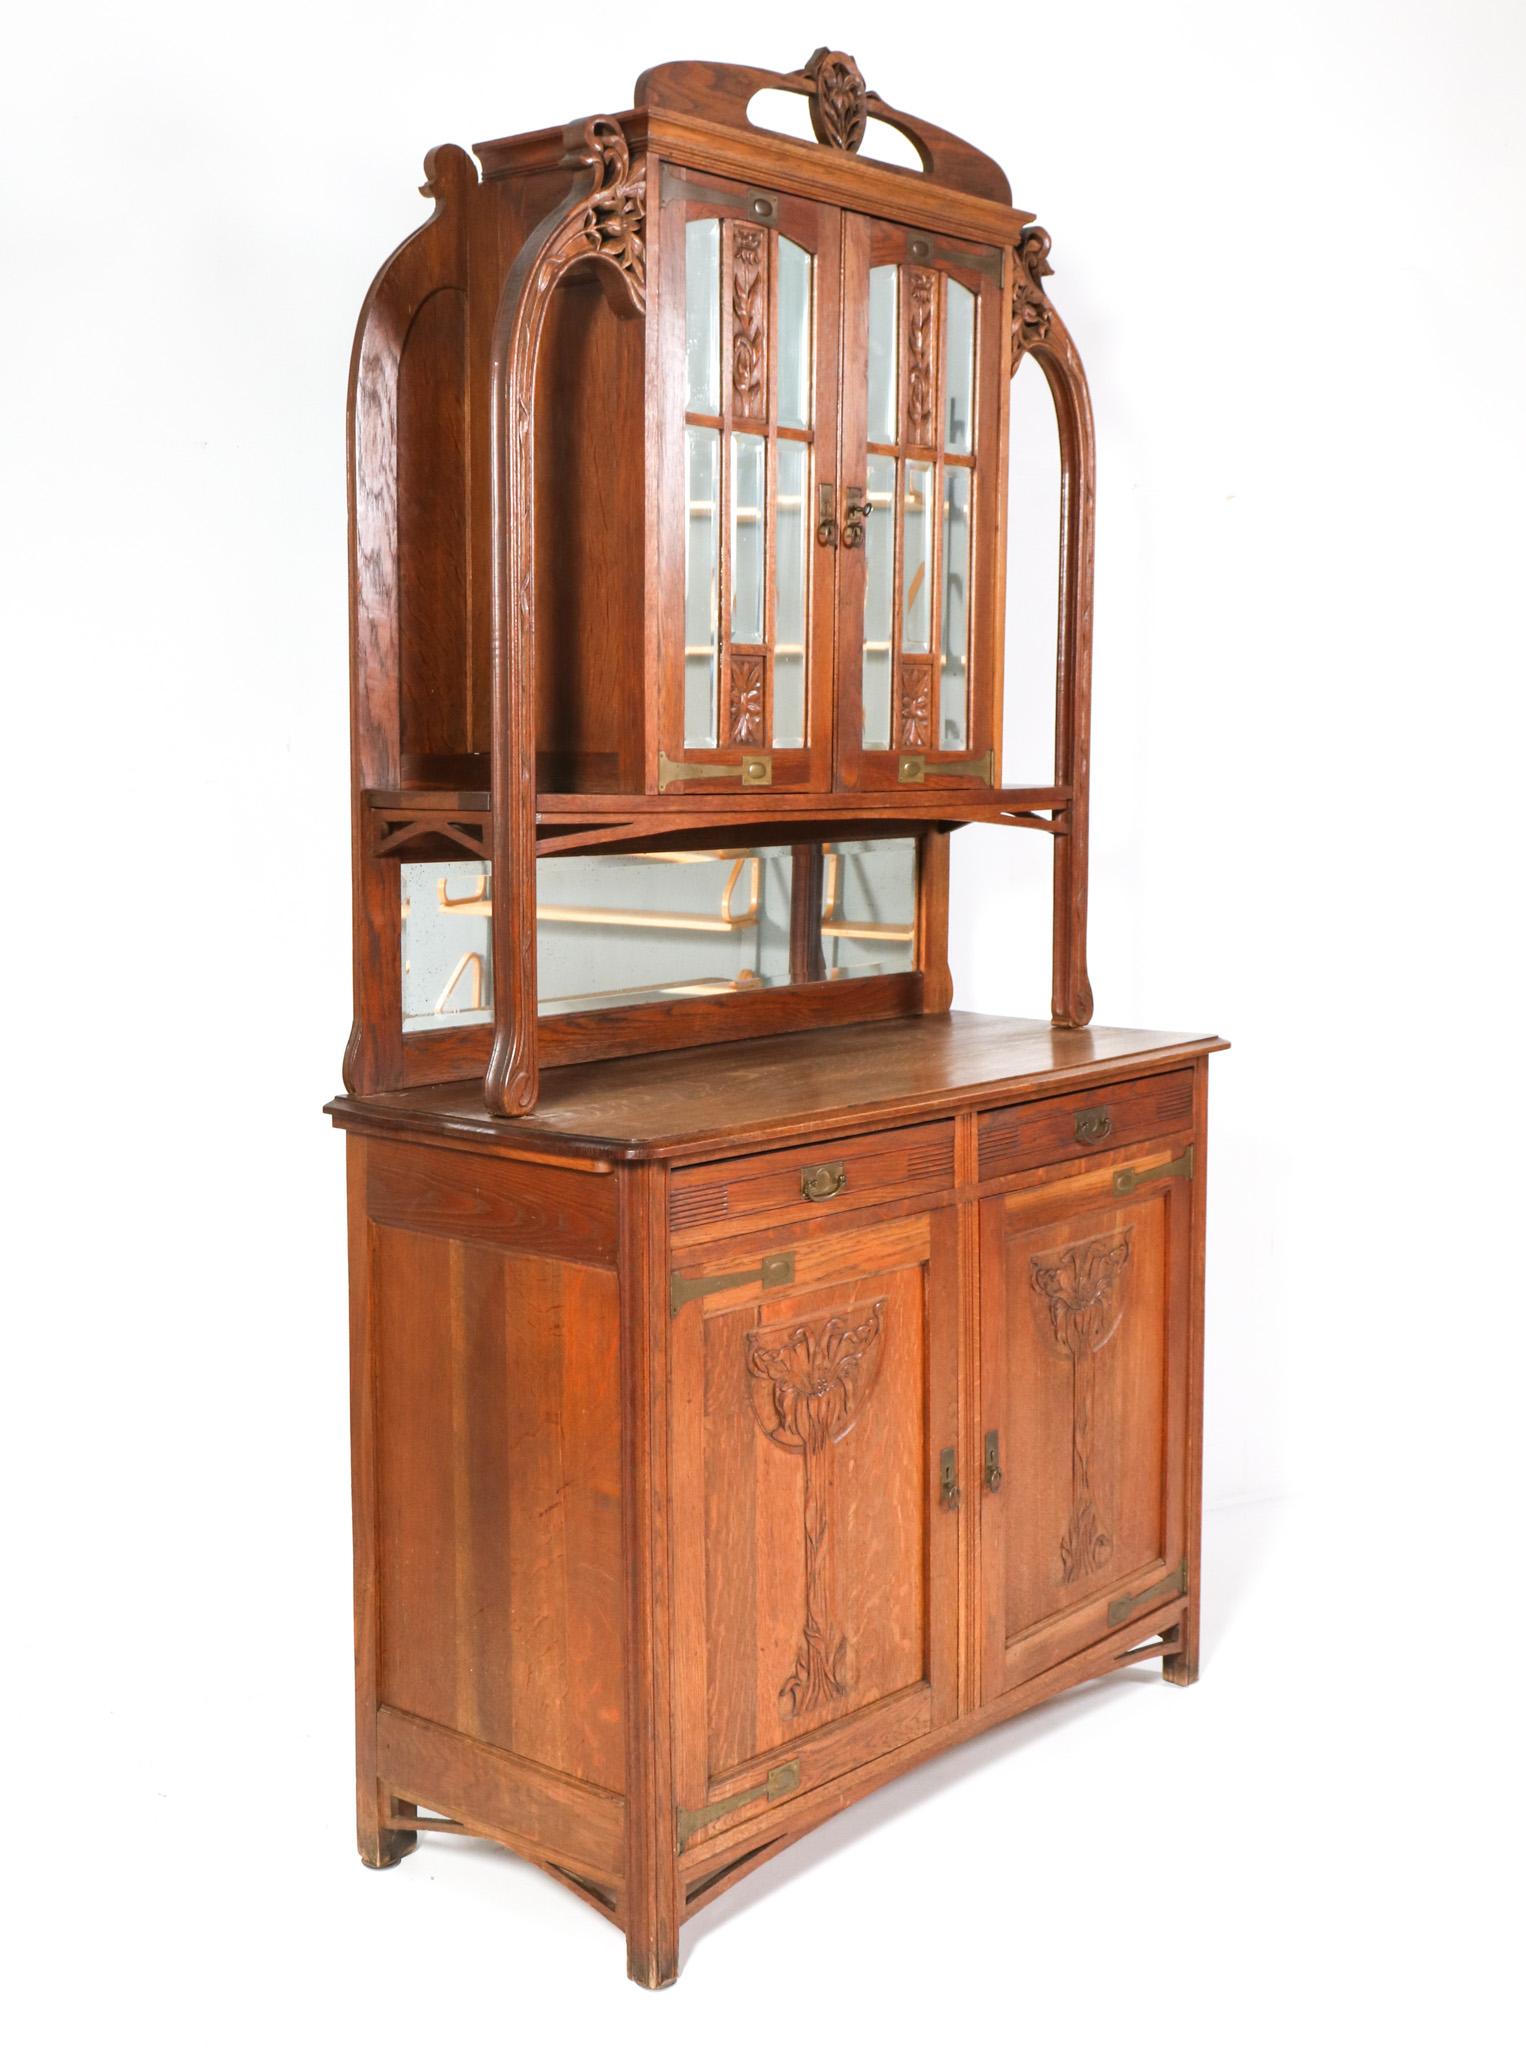 Stunning and rare Art Nouveau buffet.
Striking French design from the 1900s.
Solid oak base with two doors and two drawers and original brass handles and hinges.
Solid oak top with original beveled glass in the two doors and original brass handles